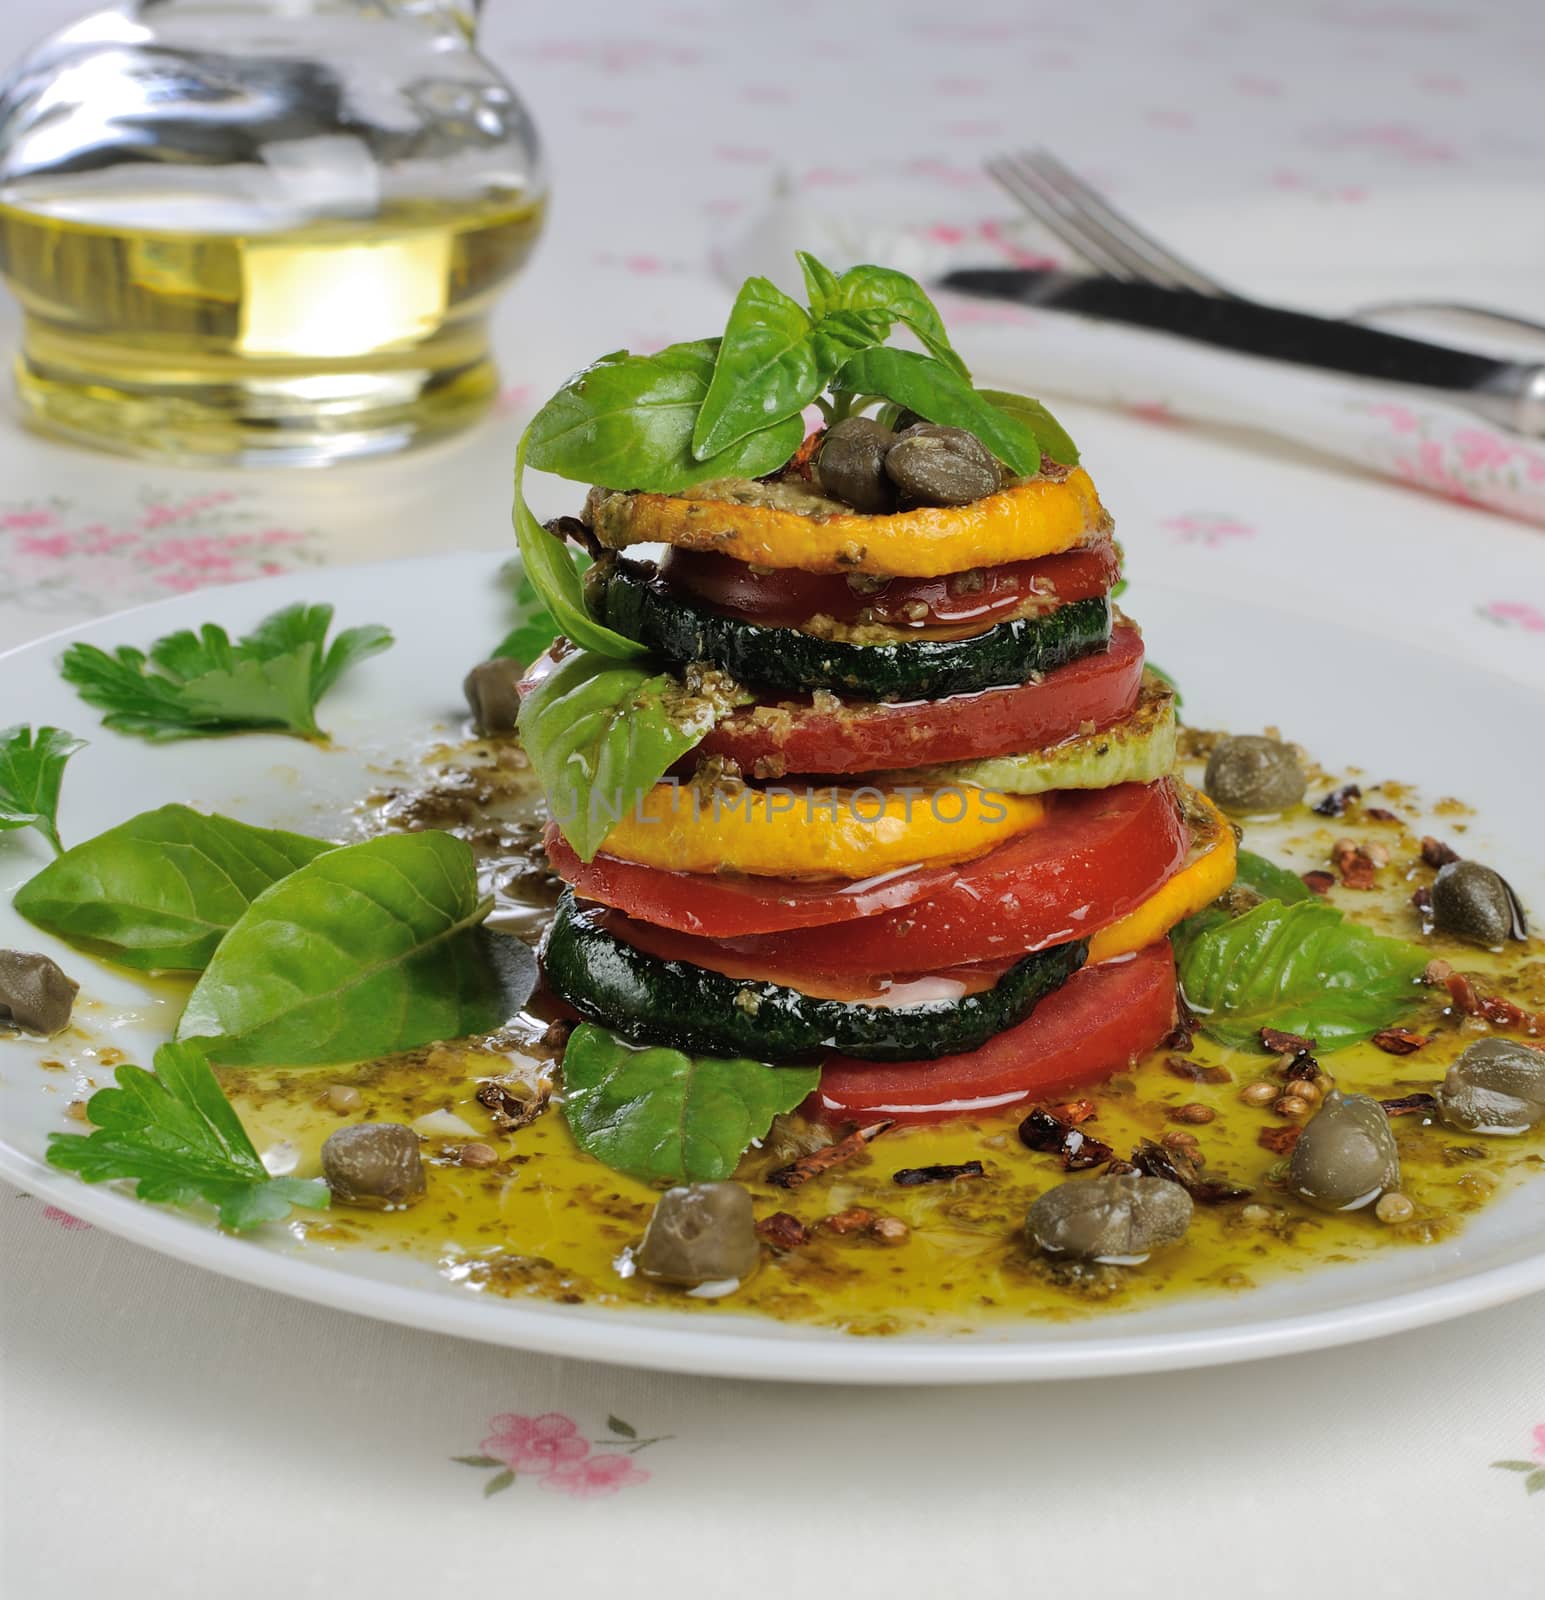 Appetizer of zucchini with tomato, pesto and capers